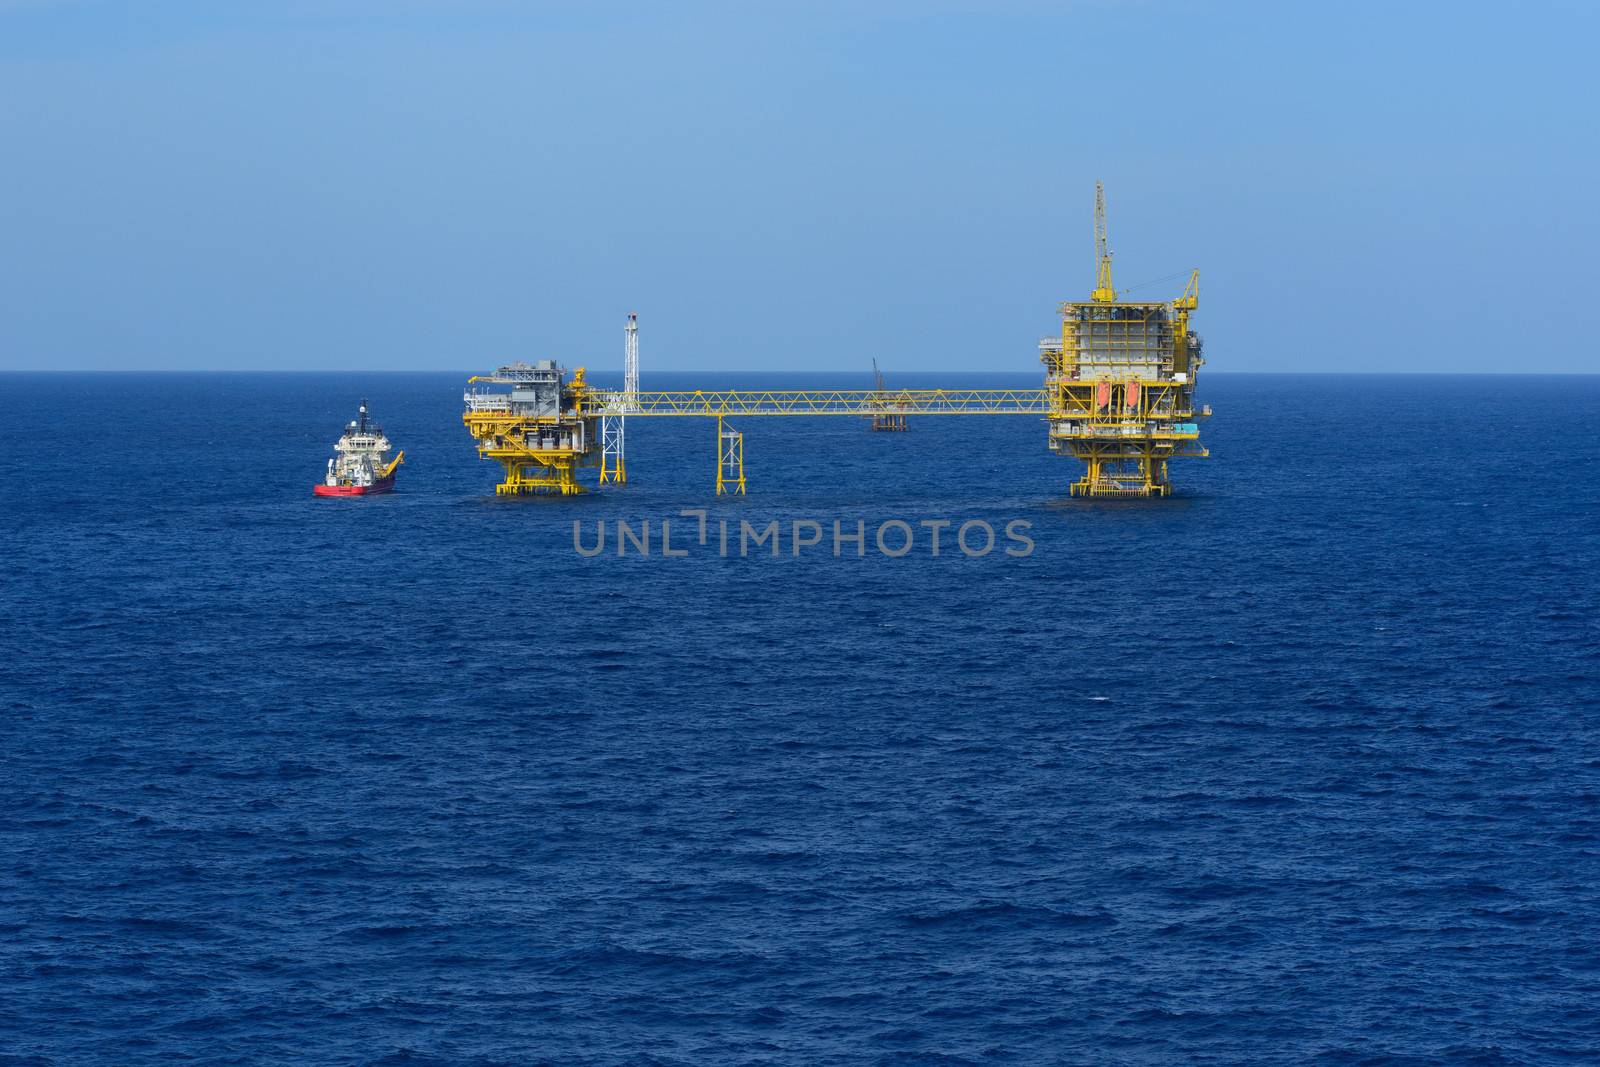 The offshore drilling oil rig and supply boat